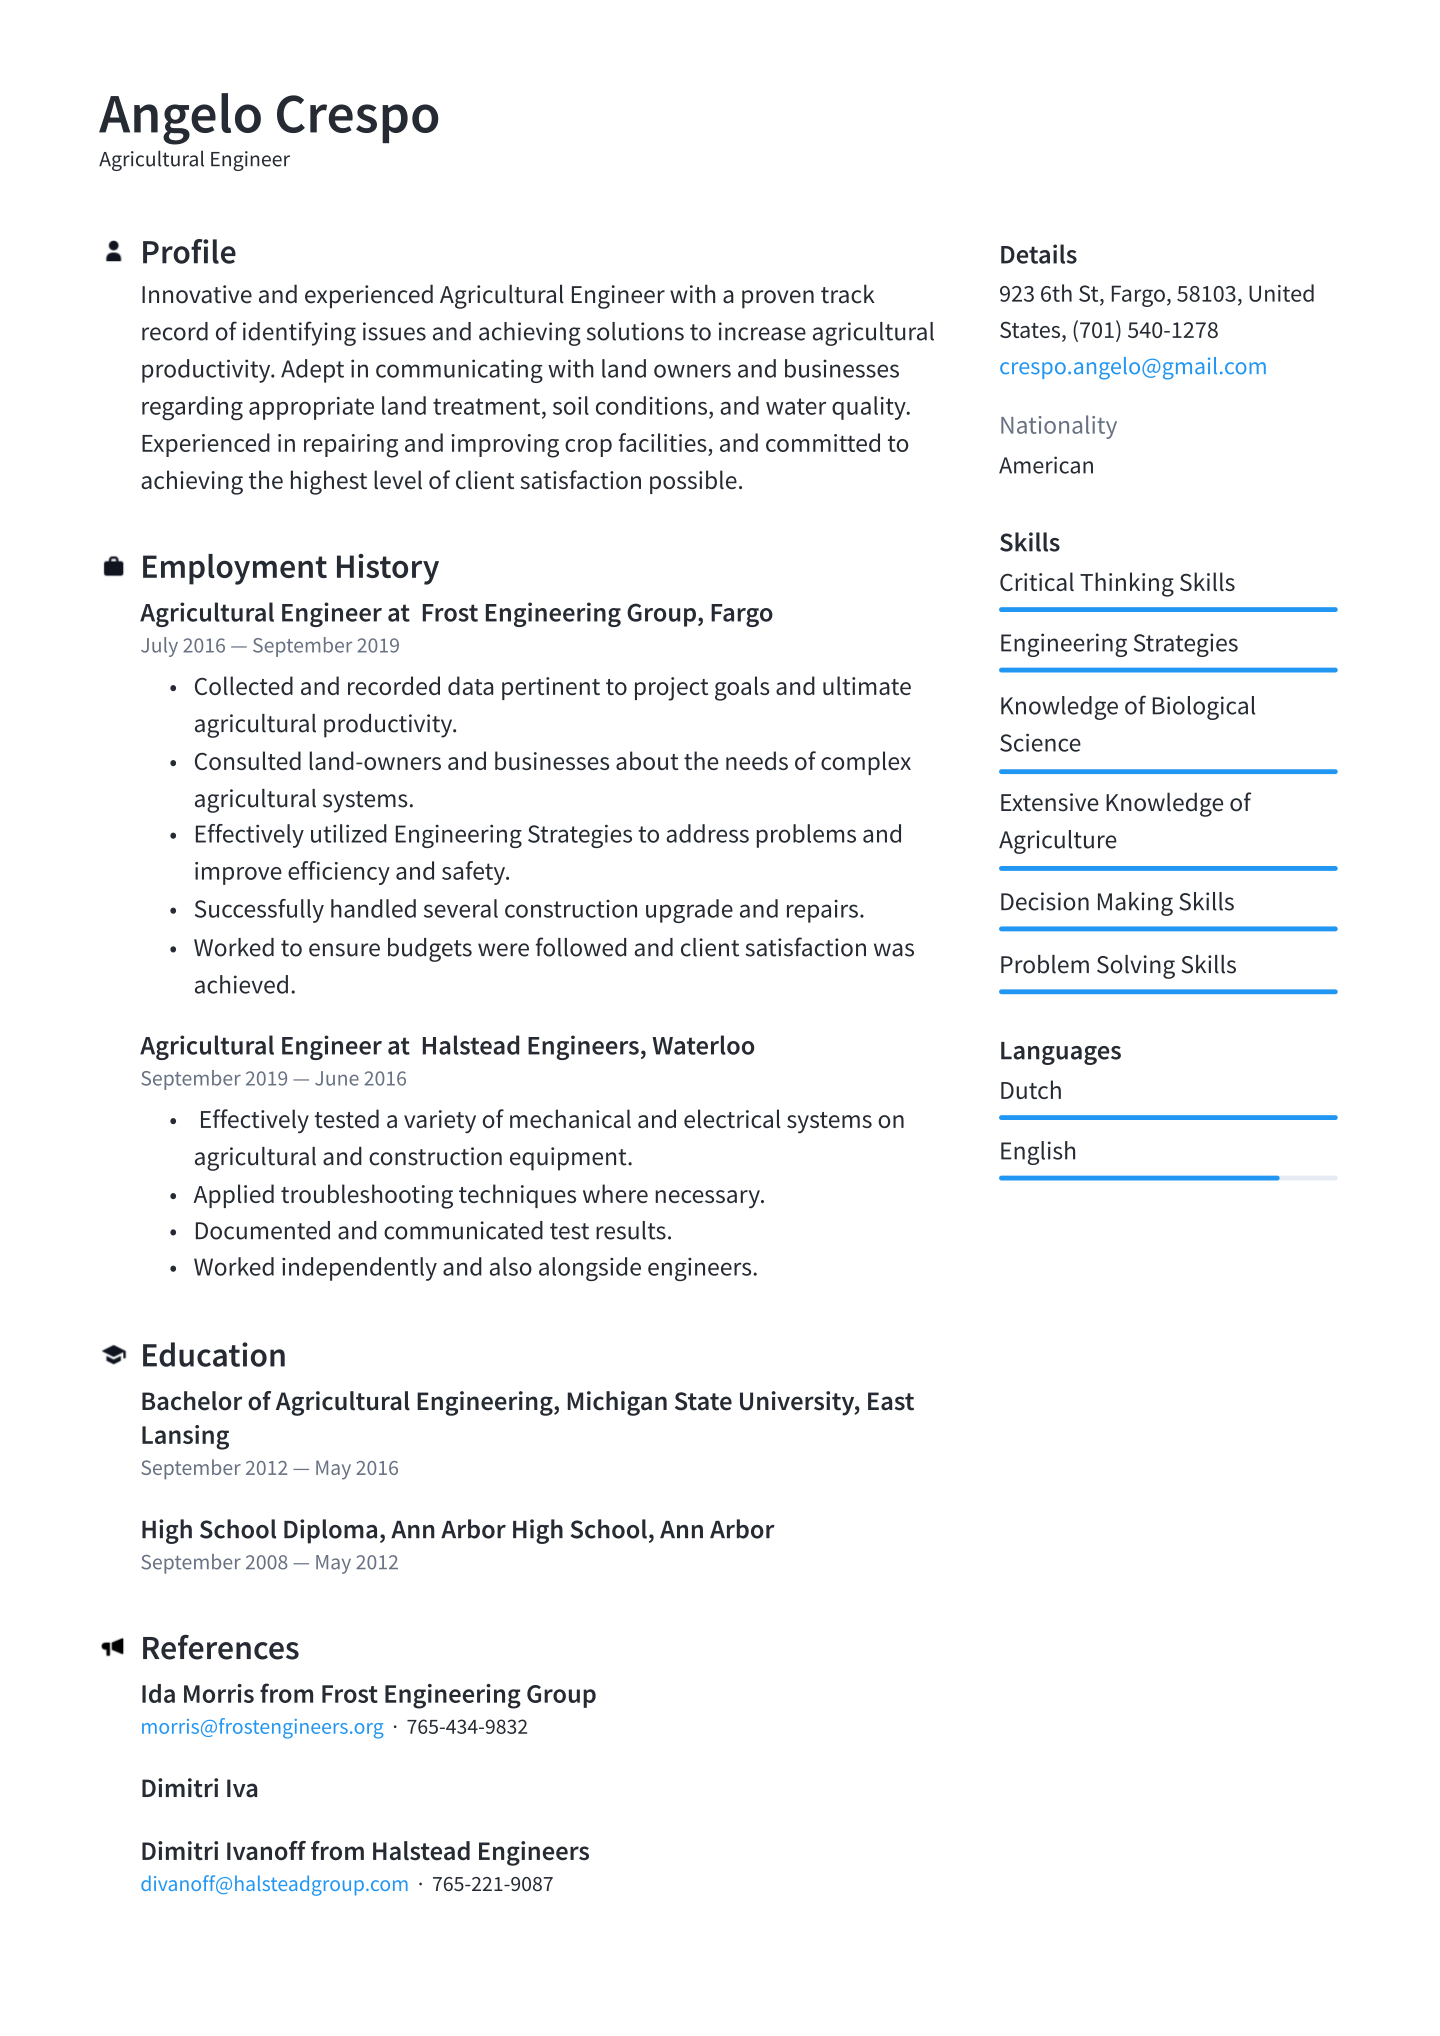 Agricultural Engineer Resume Examples Writing Tips 2020 intended for size 1440 X 2036